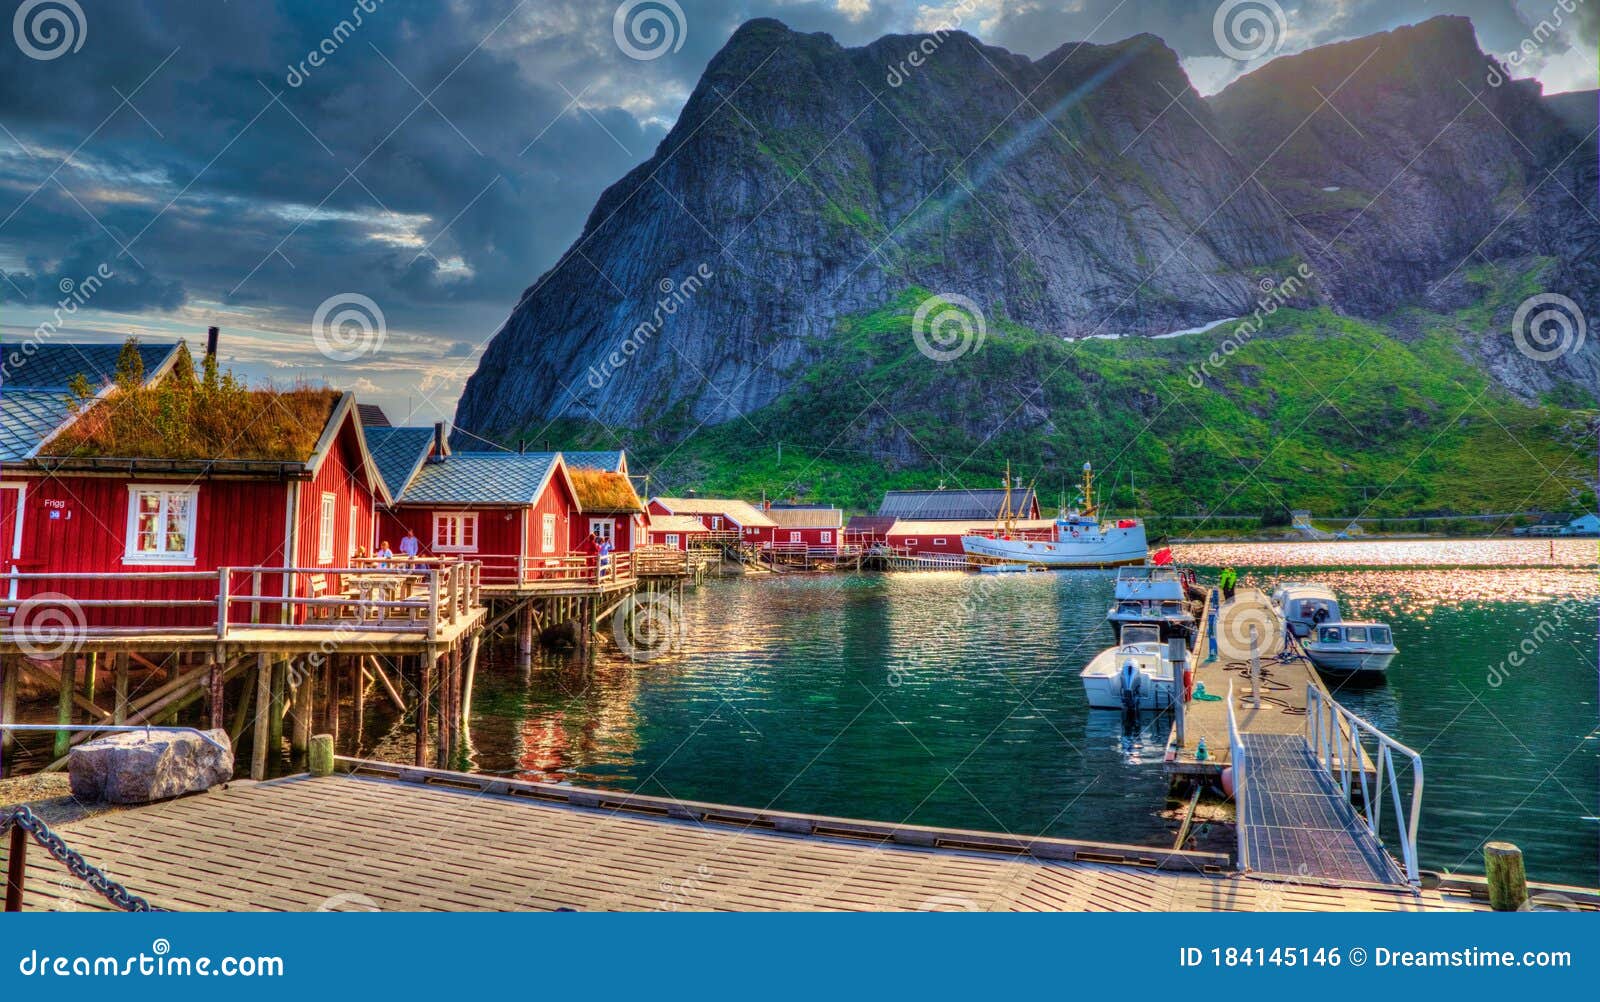 moskenes,norway: a collection of picturesque fishing villages.